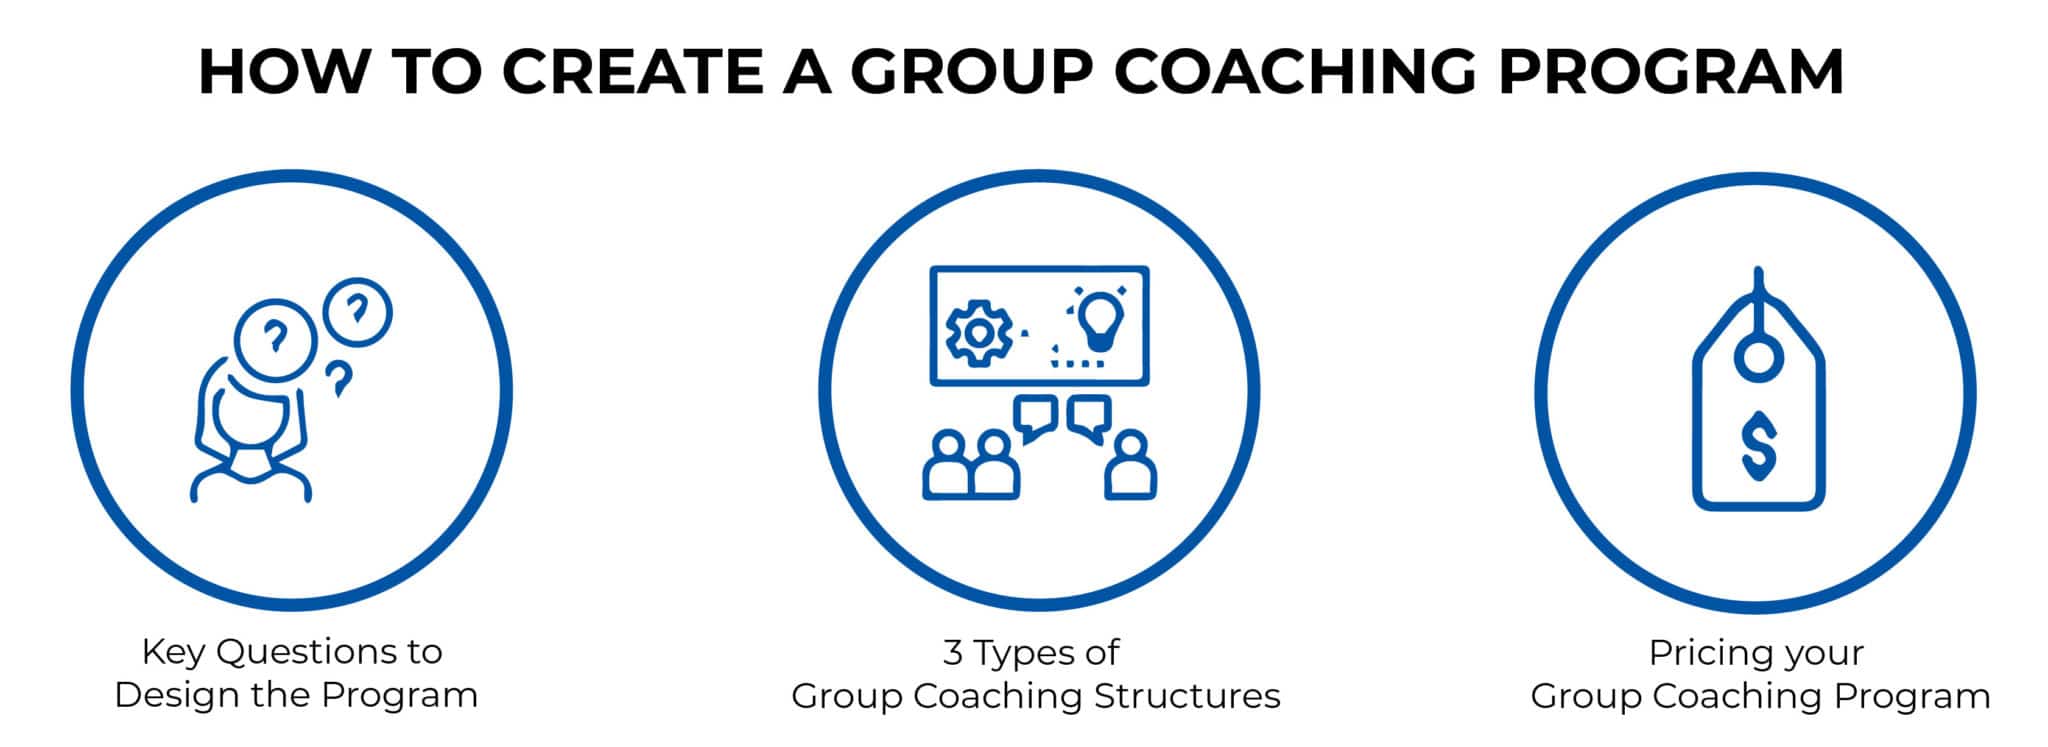 HOW TO CREATE A GROUP OF COACHING PROGRAM